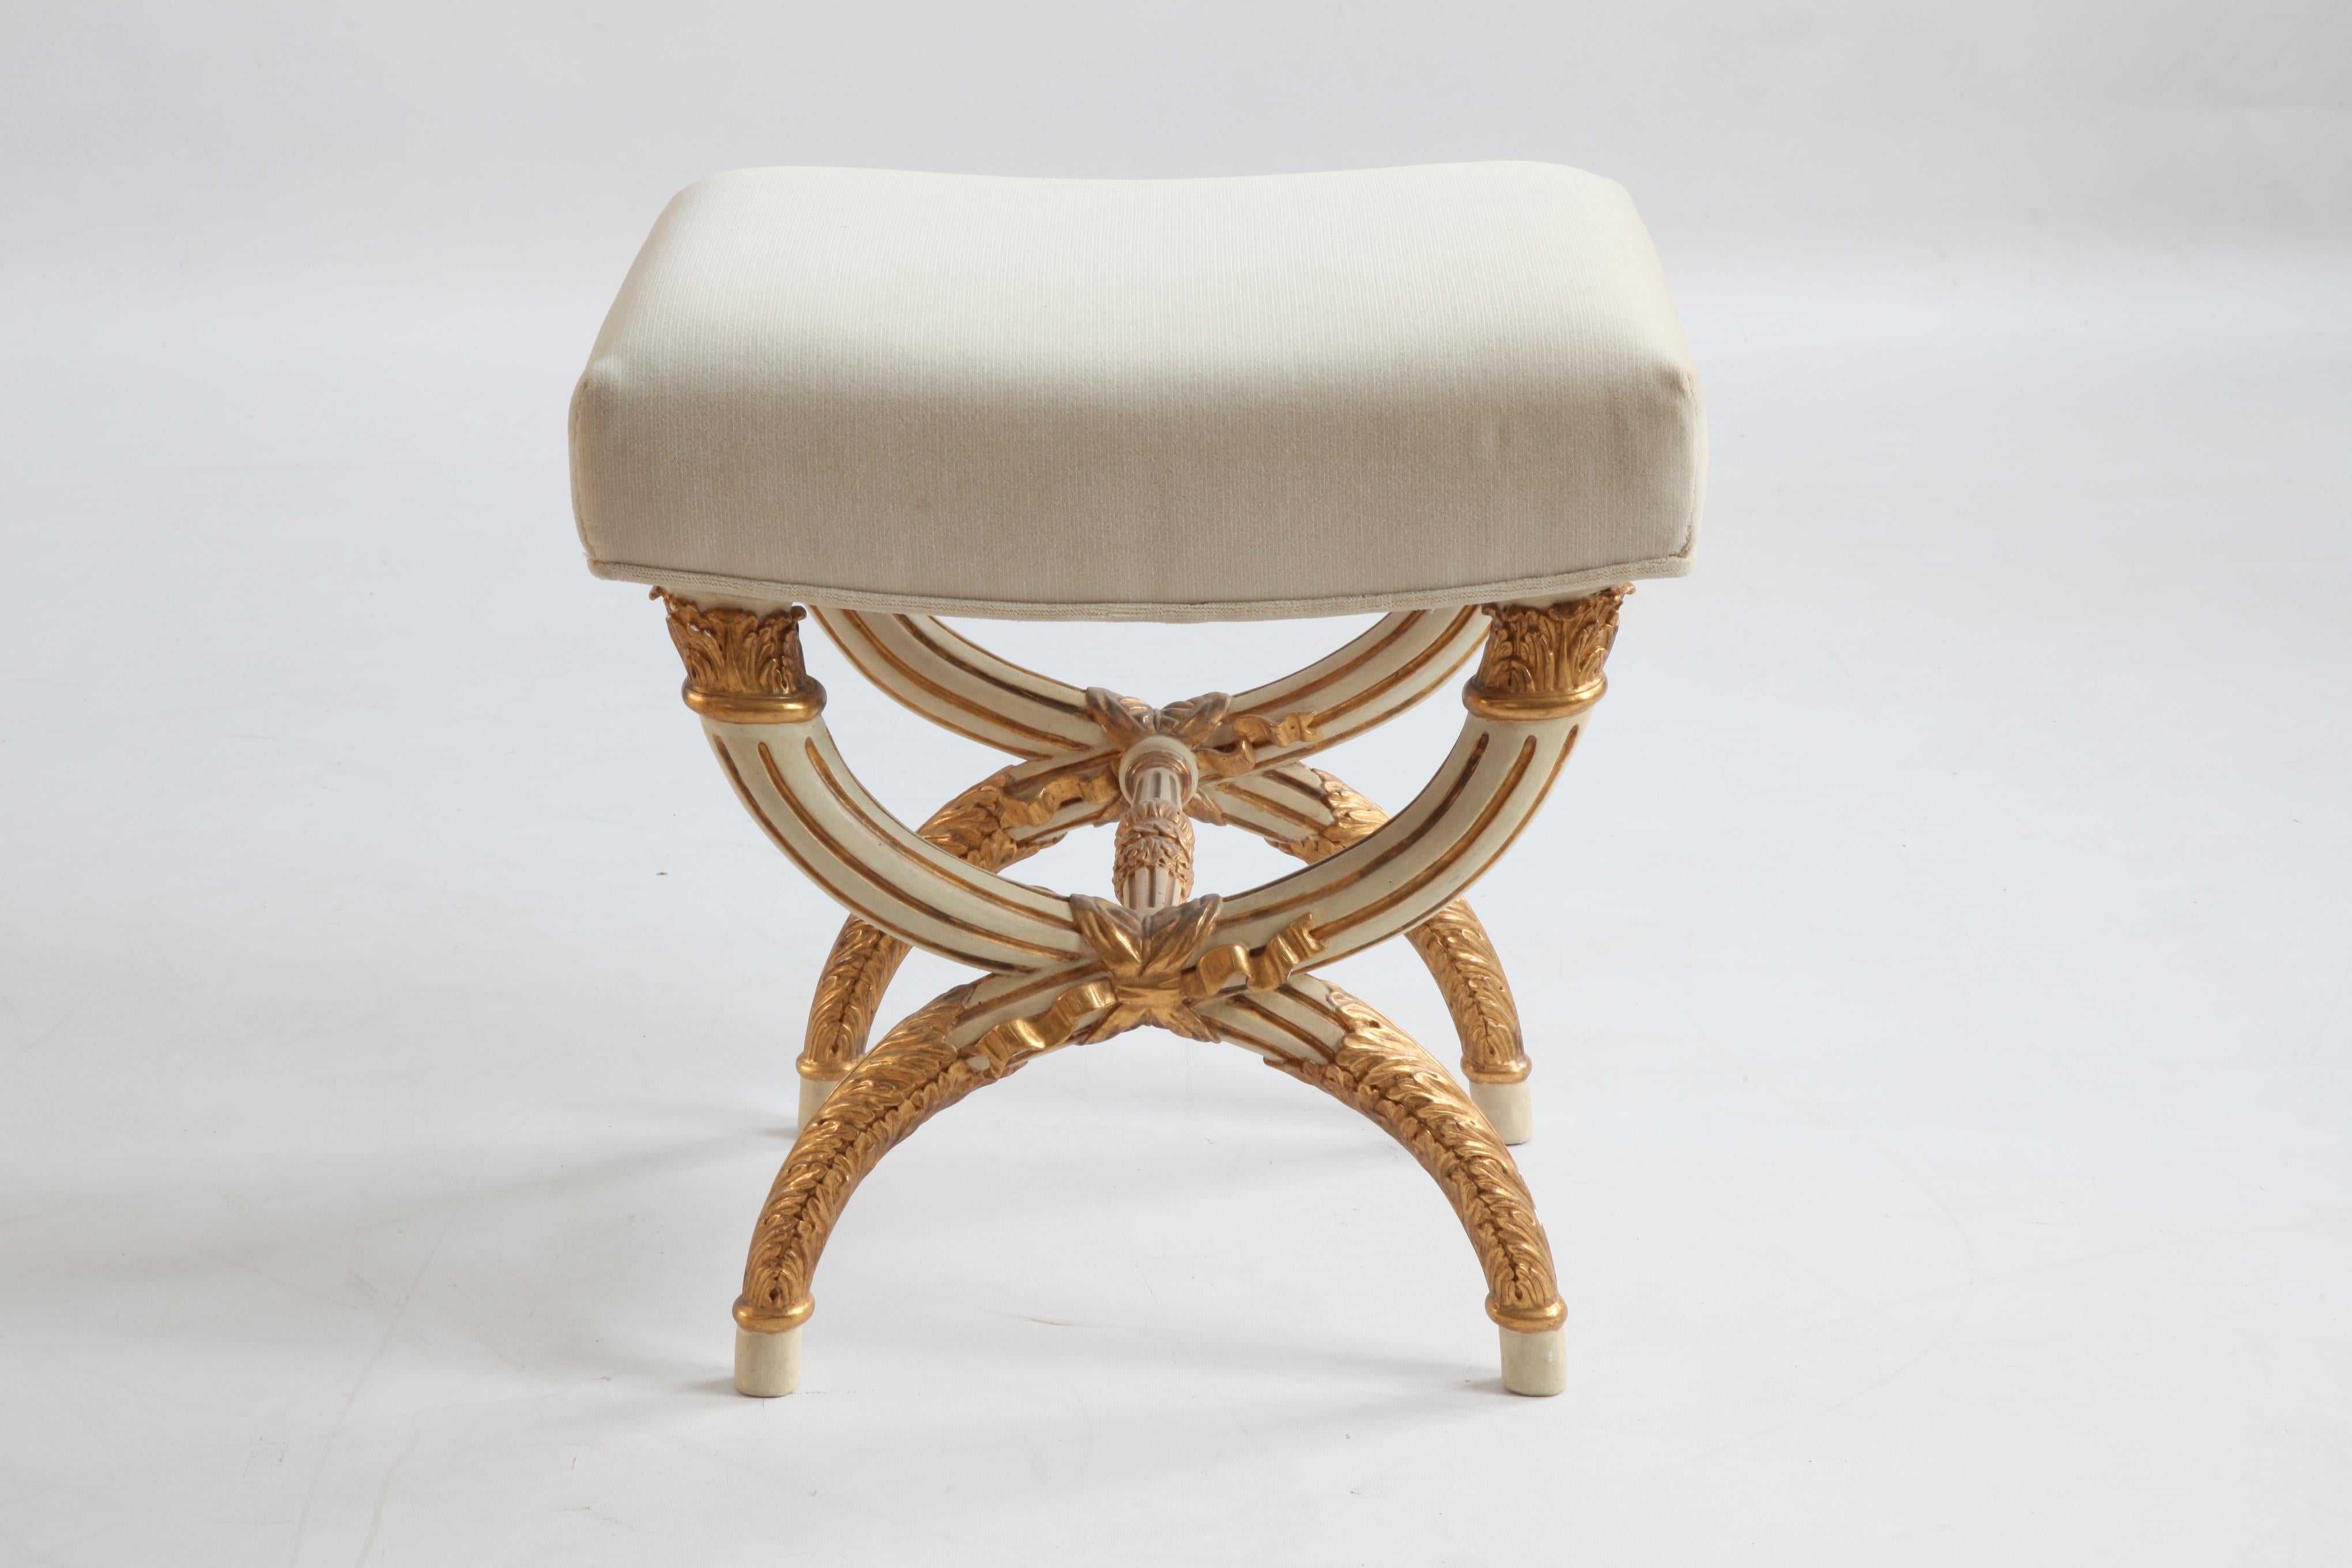 Hand-Carved Louis XVI Style Stool in X-Shaped, Painted in Warm Grey with Gold Highlights